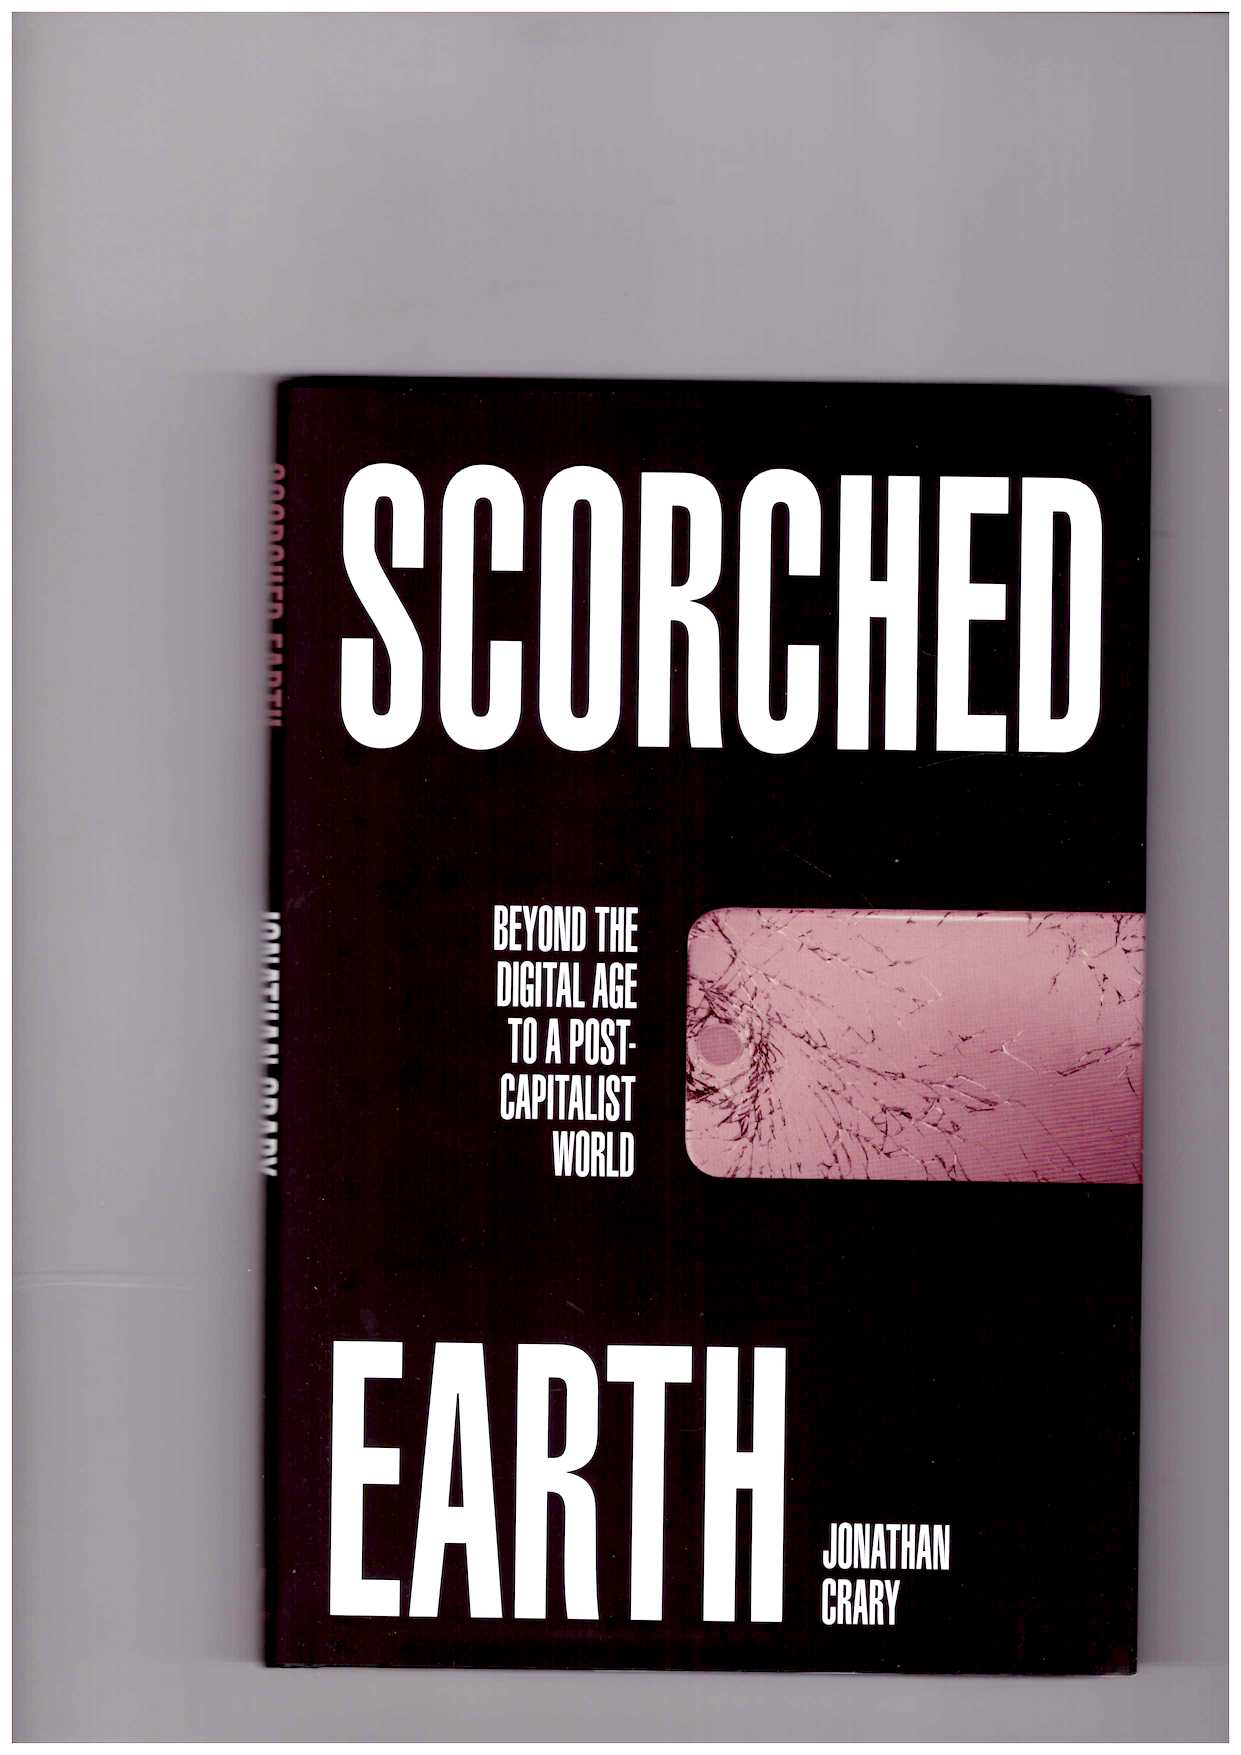 CRARY, Jonathan - Scorched Earth Beyond the Digital Age to a Post-Capitalist World